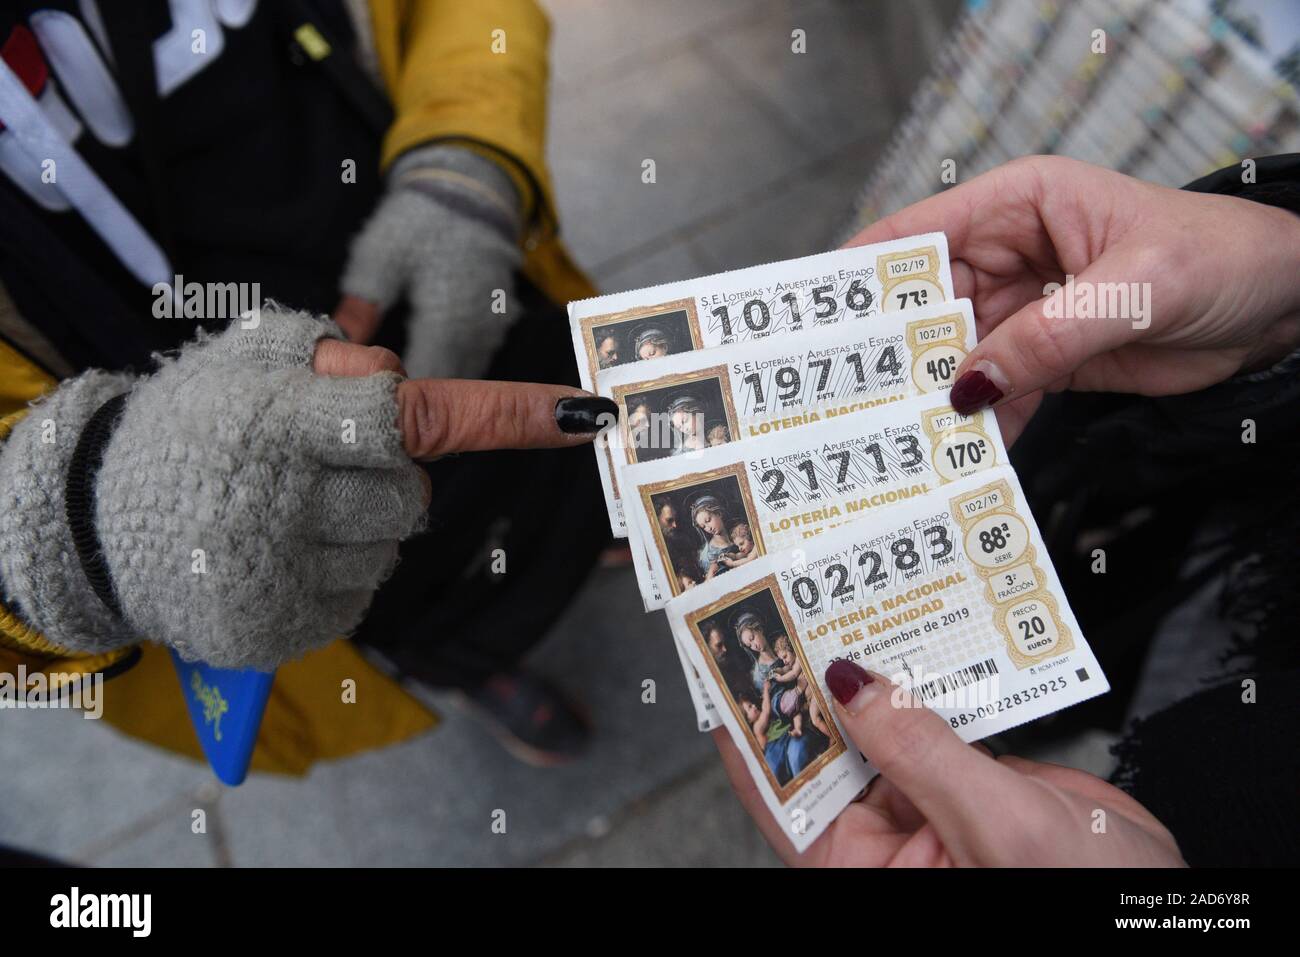 Madrid, Spain. 3rd Dec, 2019. Spanish Christmas El Gordo lottery tickets seen in Madrid.The famous draw 'El Gordo' would be celebrated on December 22, 2019. More than 2.3 billion euros ($3 billion) in prizes would be distributed. Credit: John Milner/SOPA Images/ZUMA Wire/Alamy Live News Stock Photo